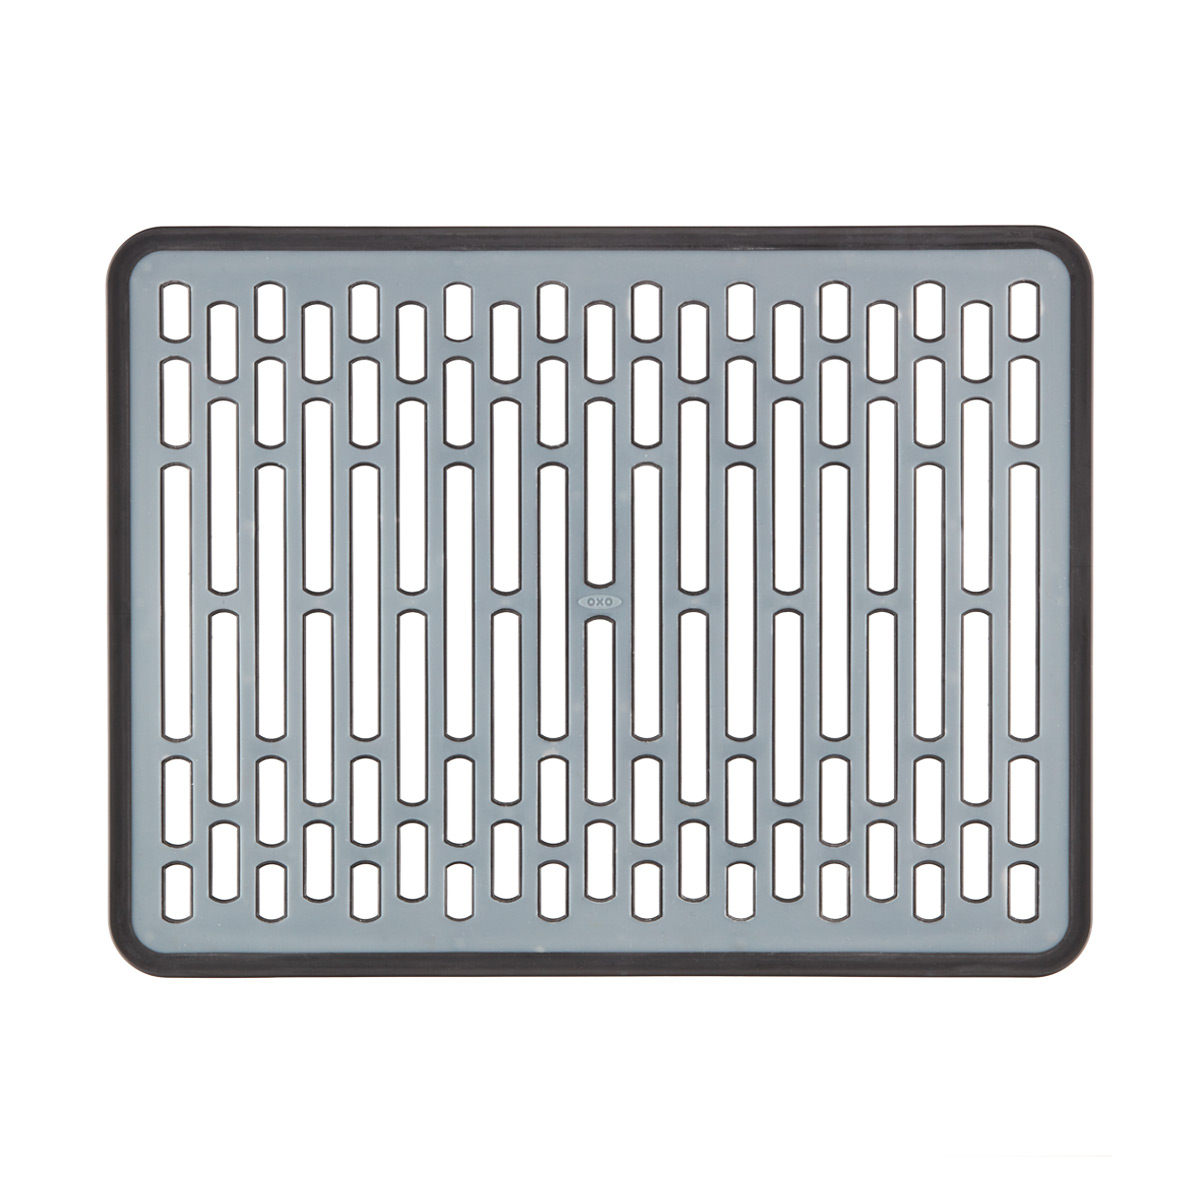 https://www.containerstore.com/catalogimages/332459/10073615-oxo-sink-mat-grey-large.jpg